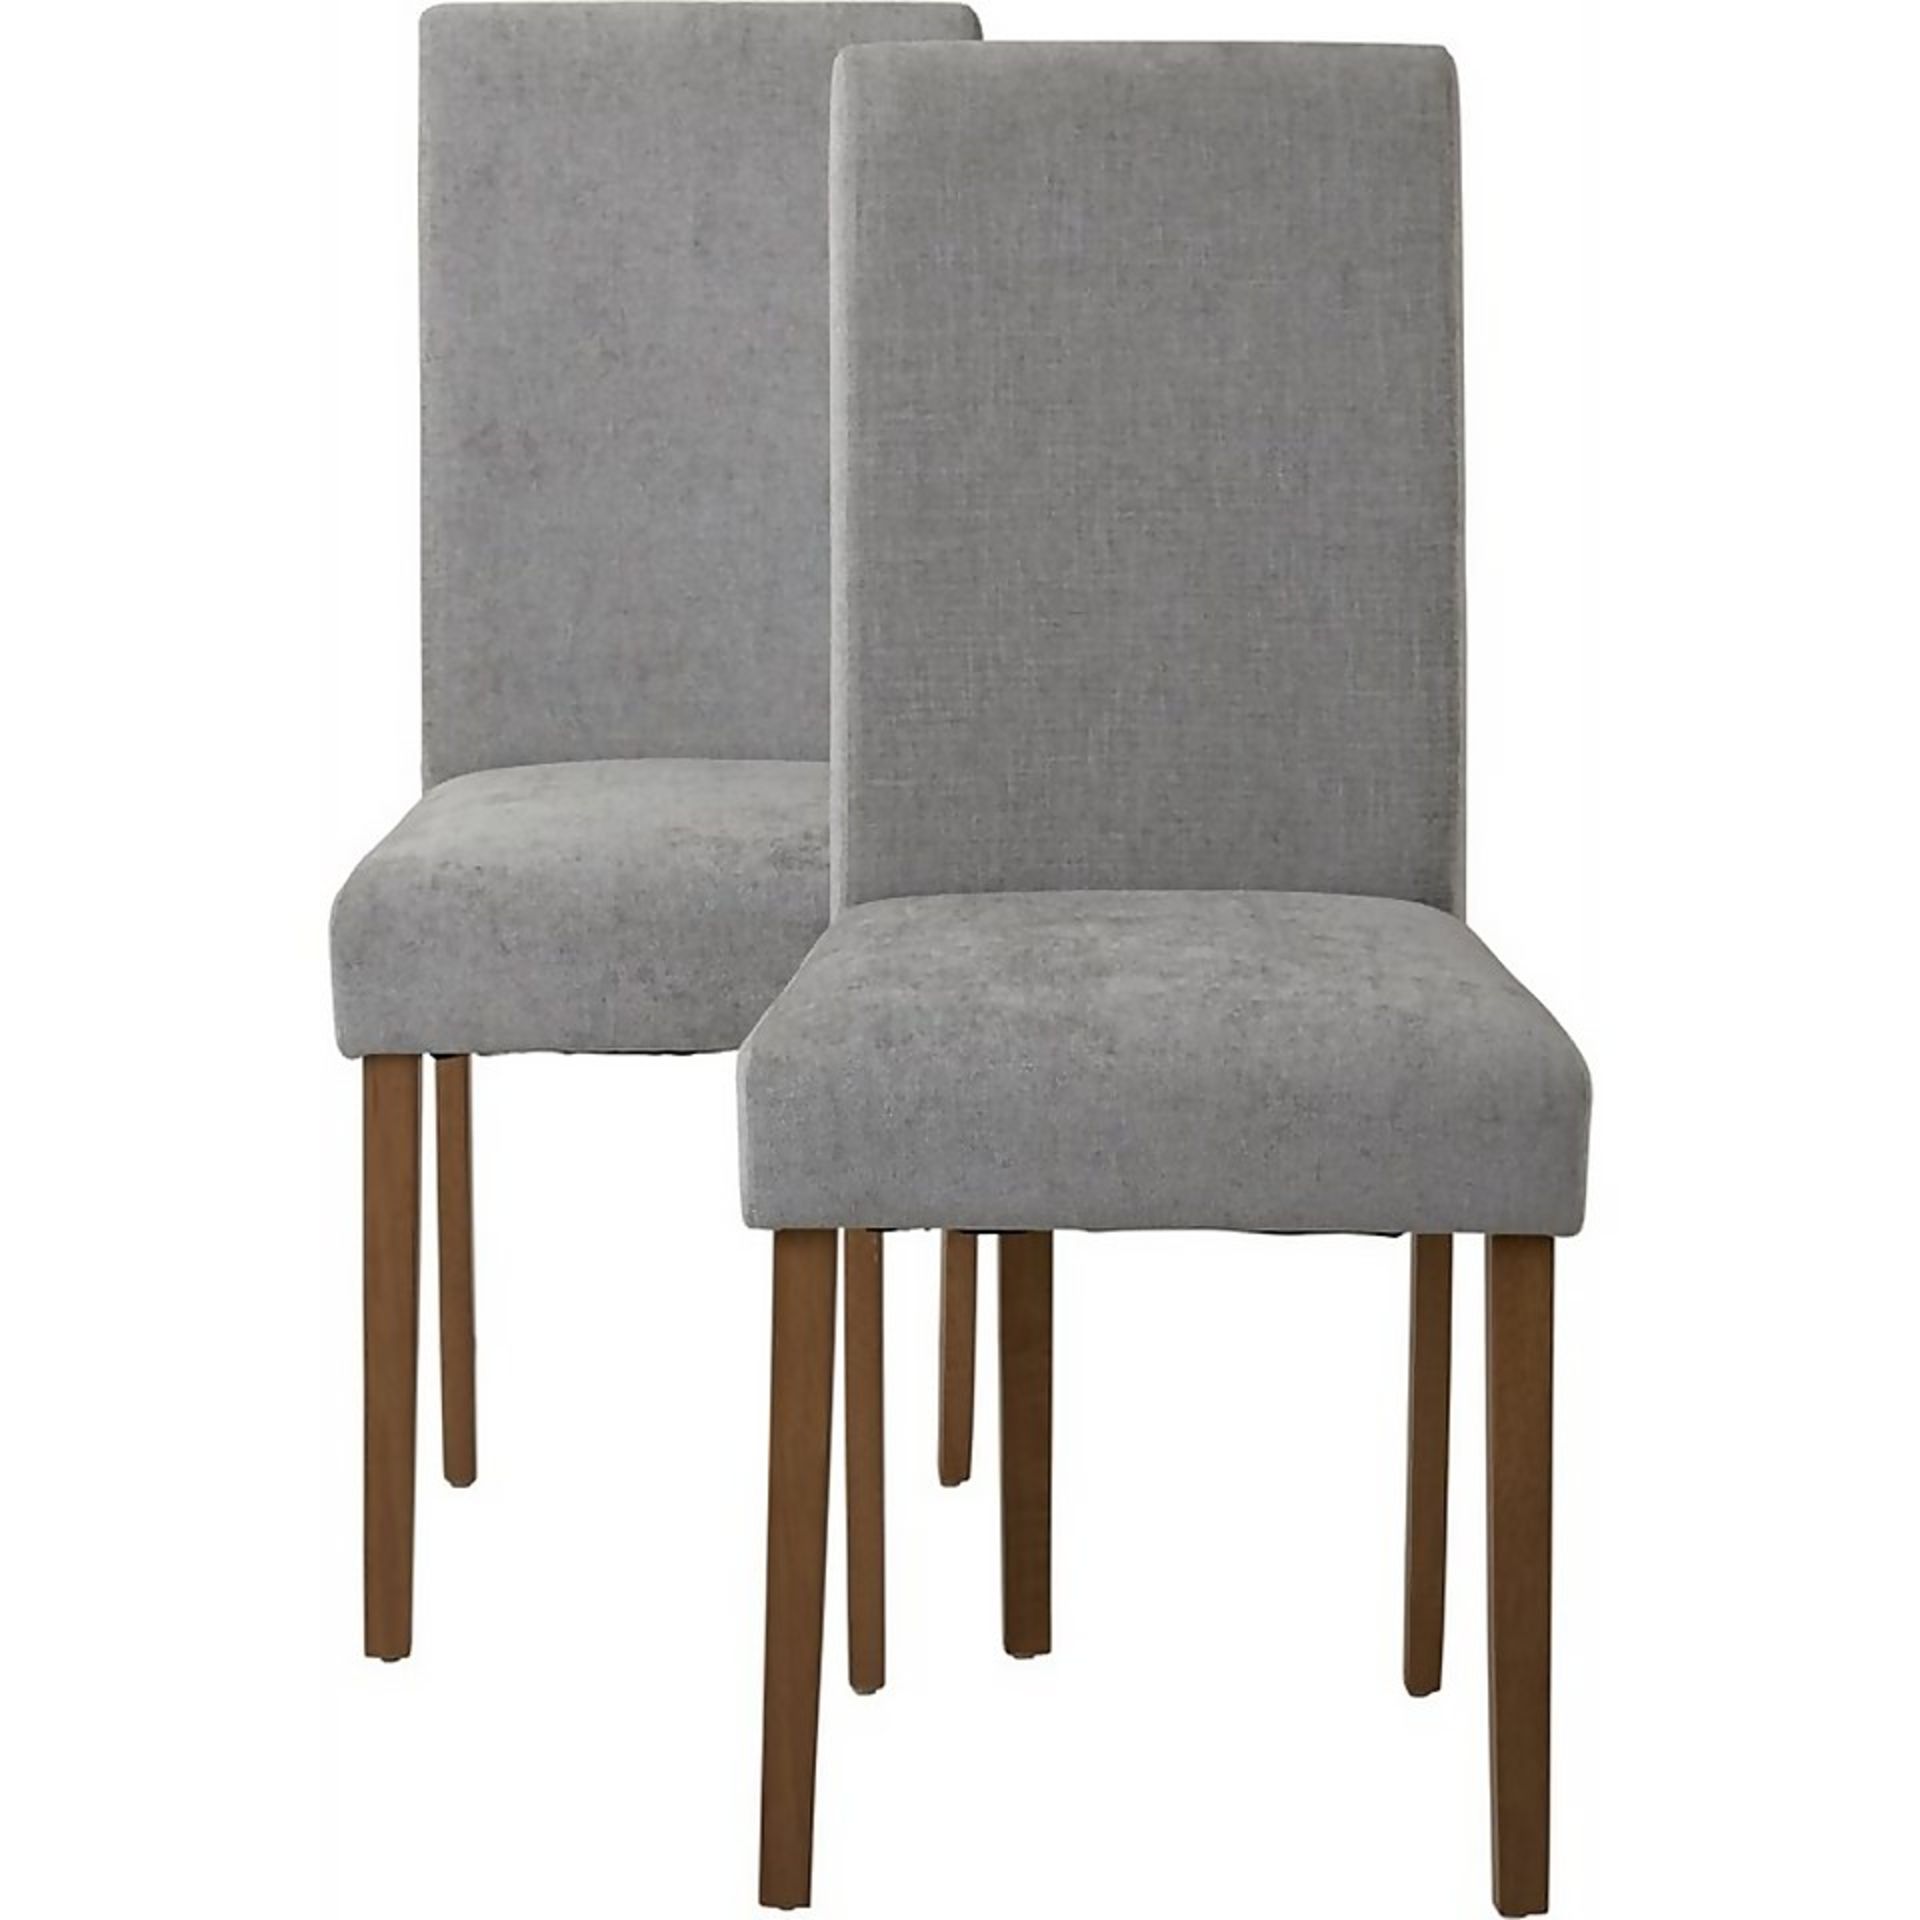 (R7D) 4 X Diva Dining Chairs. Grey Upholstered Seats. Solid Rubberwood Legs. RRP £250 - Image 3 of 4